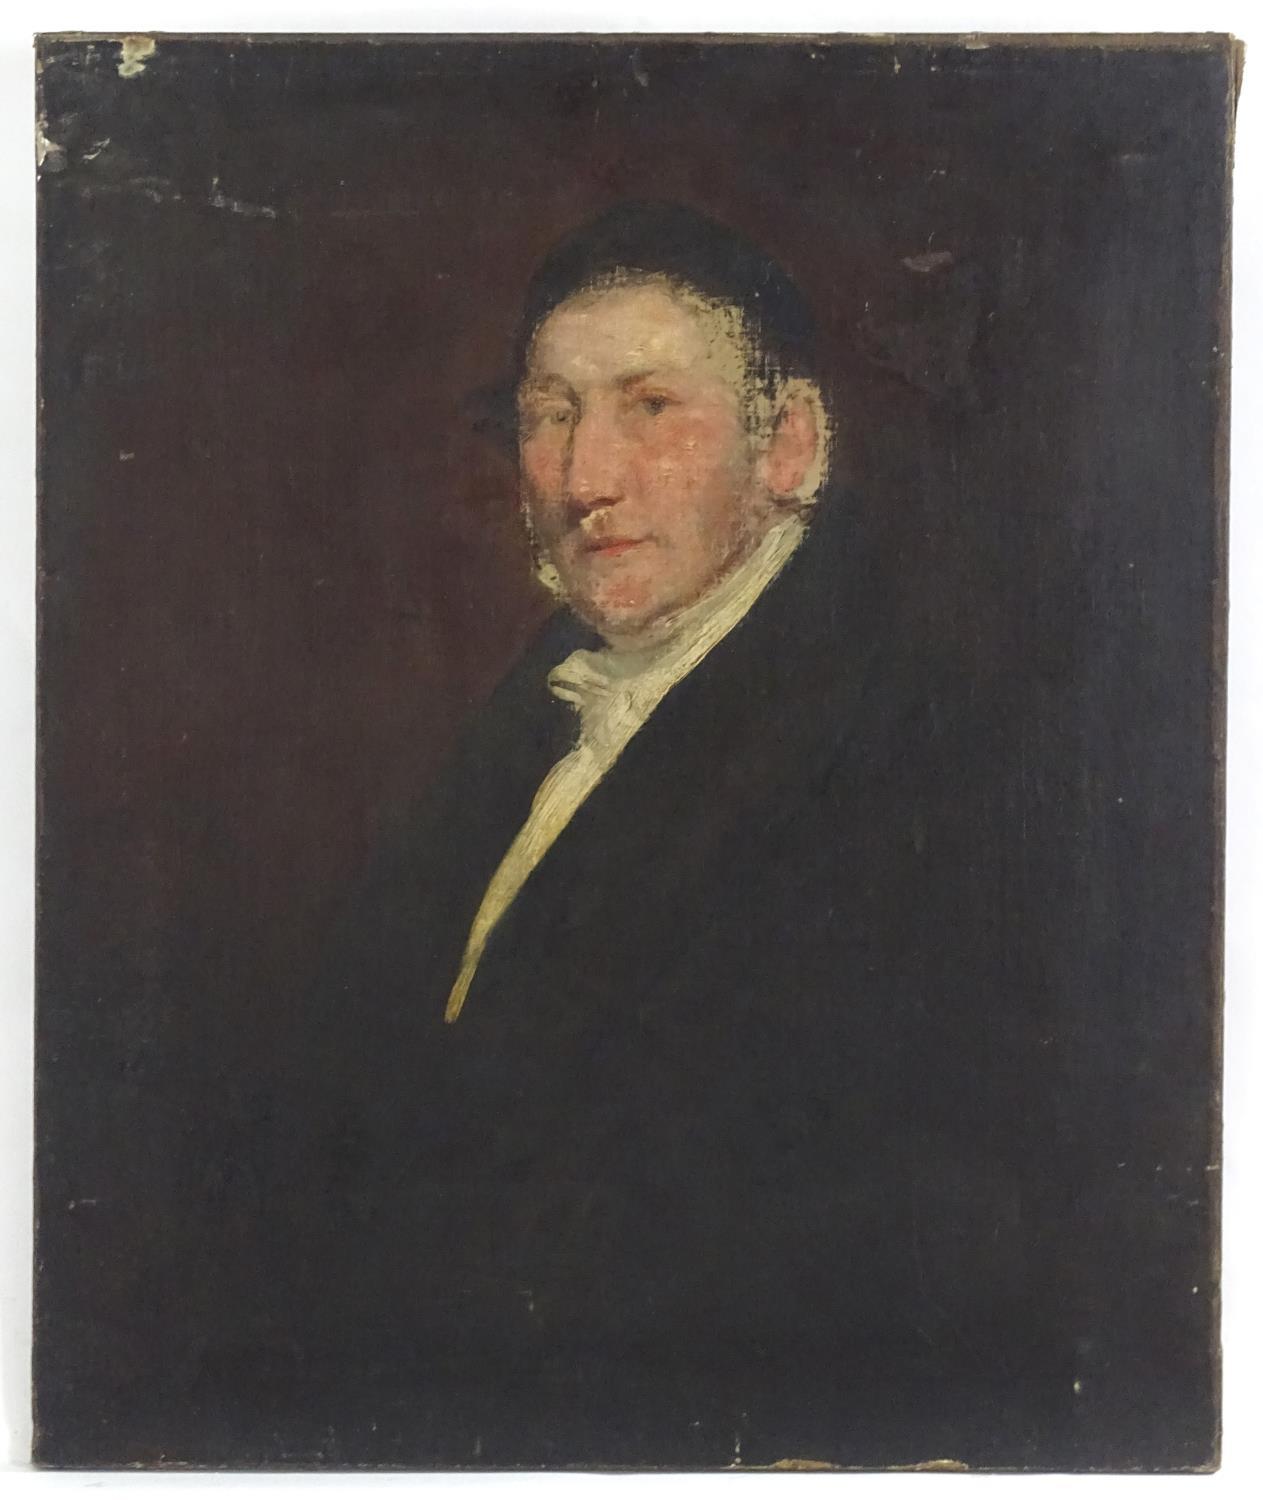 19th century, English School, Oil on canvas, A portrait of a Gentleman. Approx. 30" x 24 3/4" Please